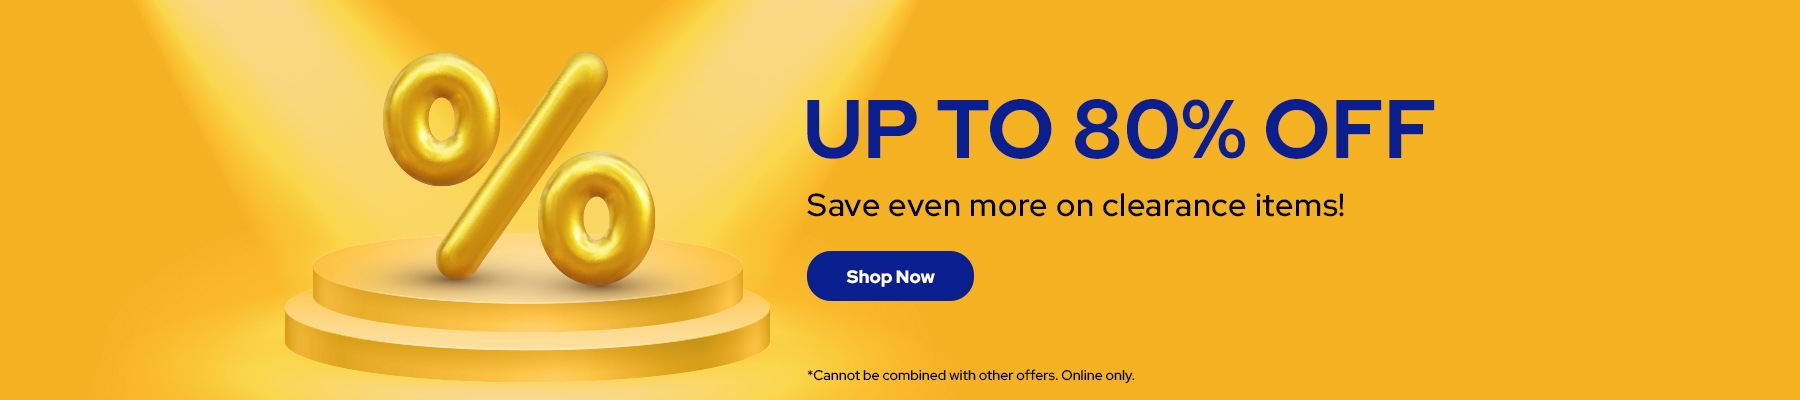 Up to 80% off Clearance Products